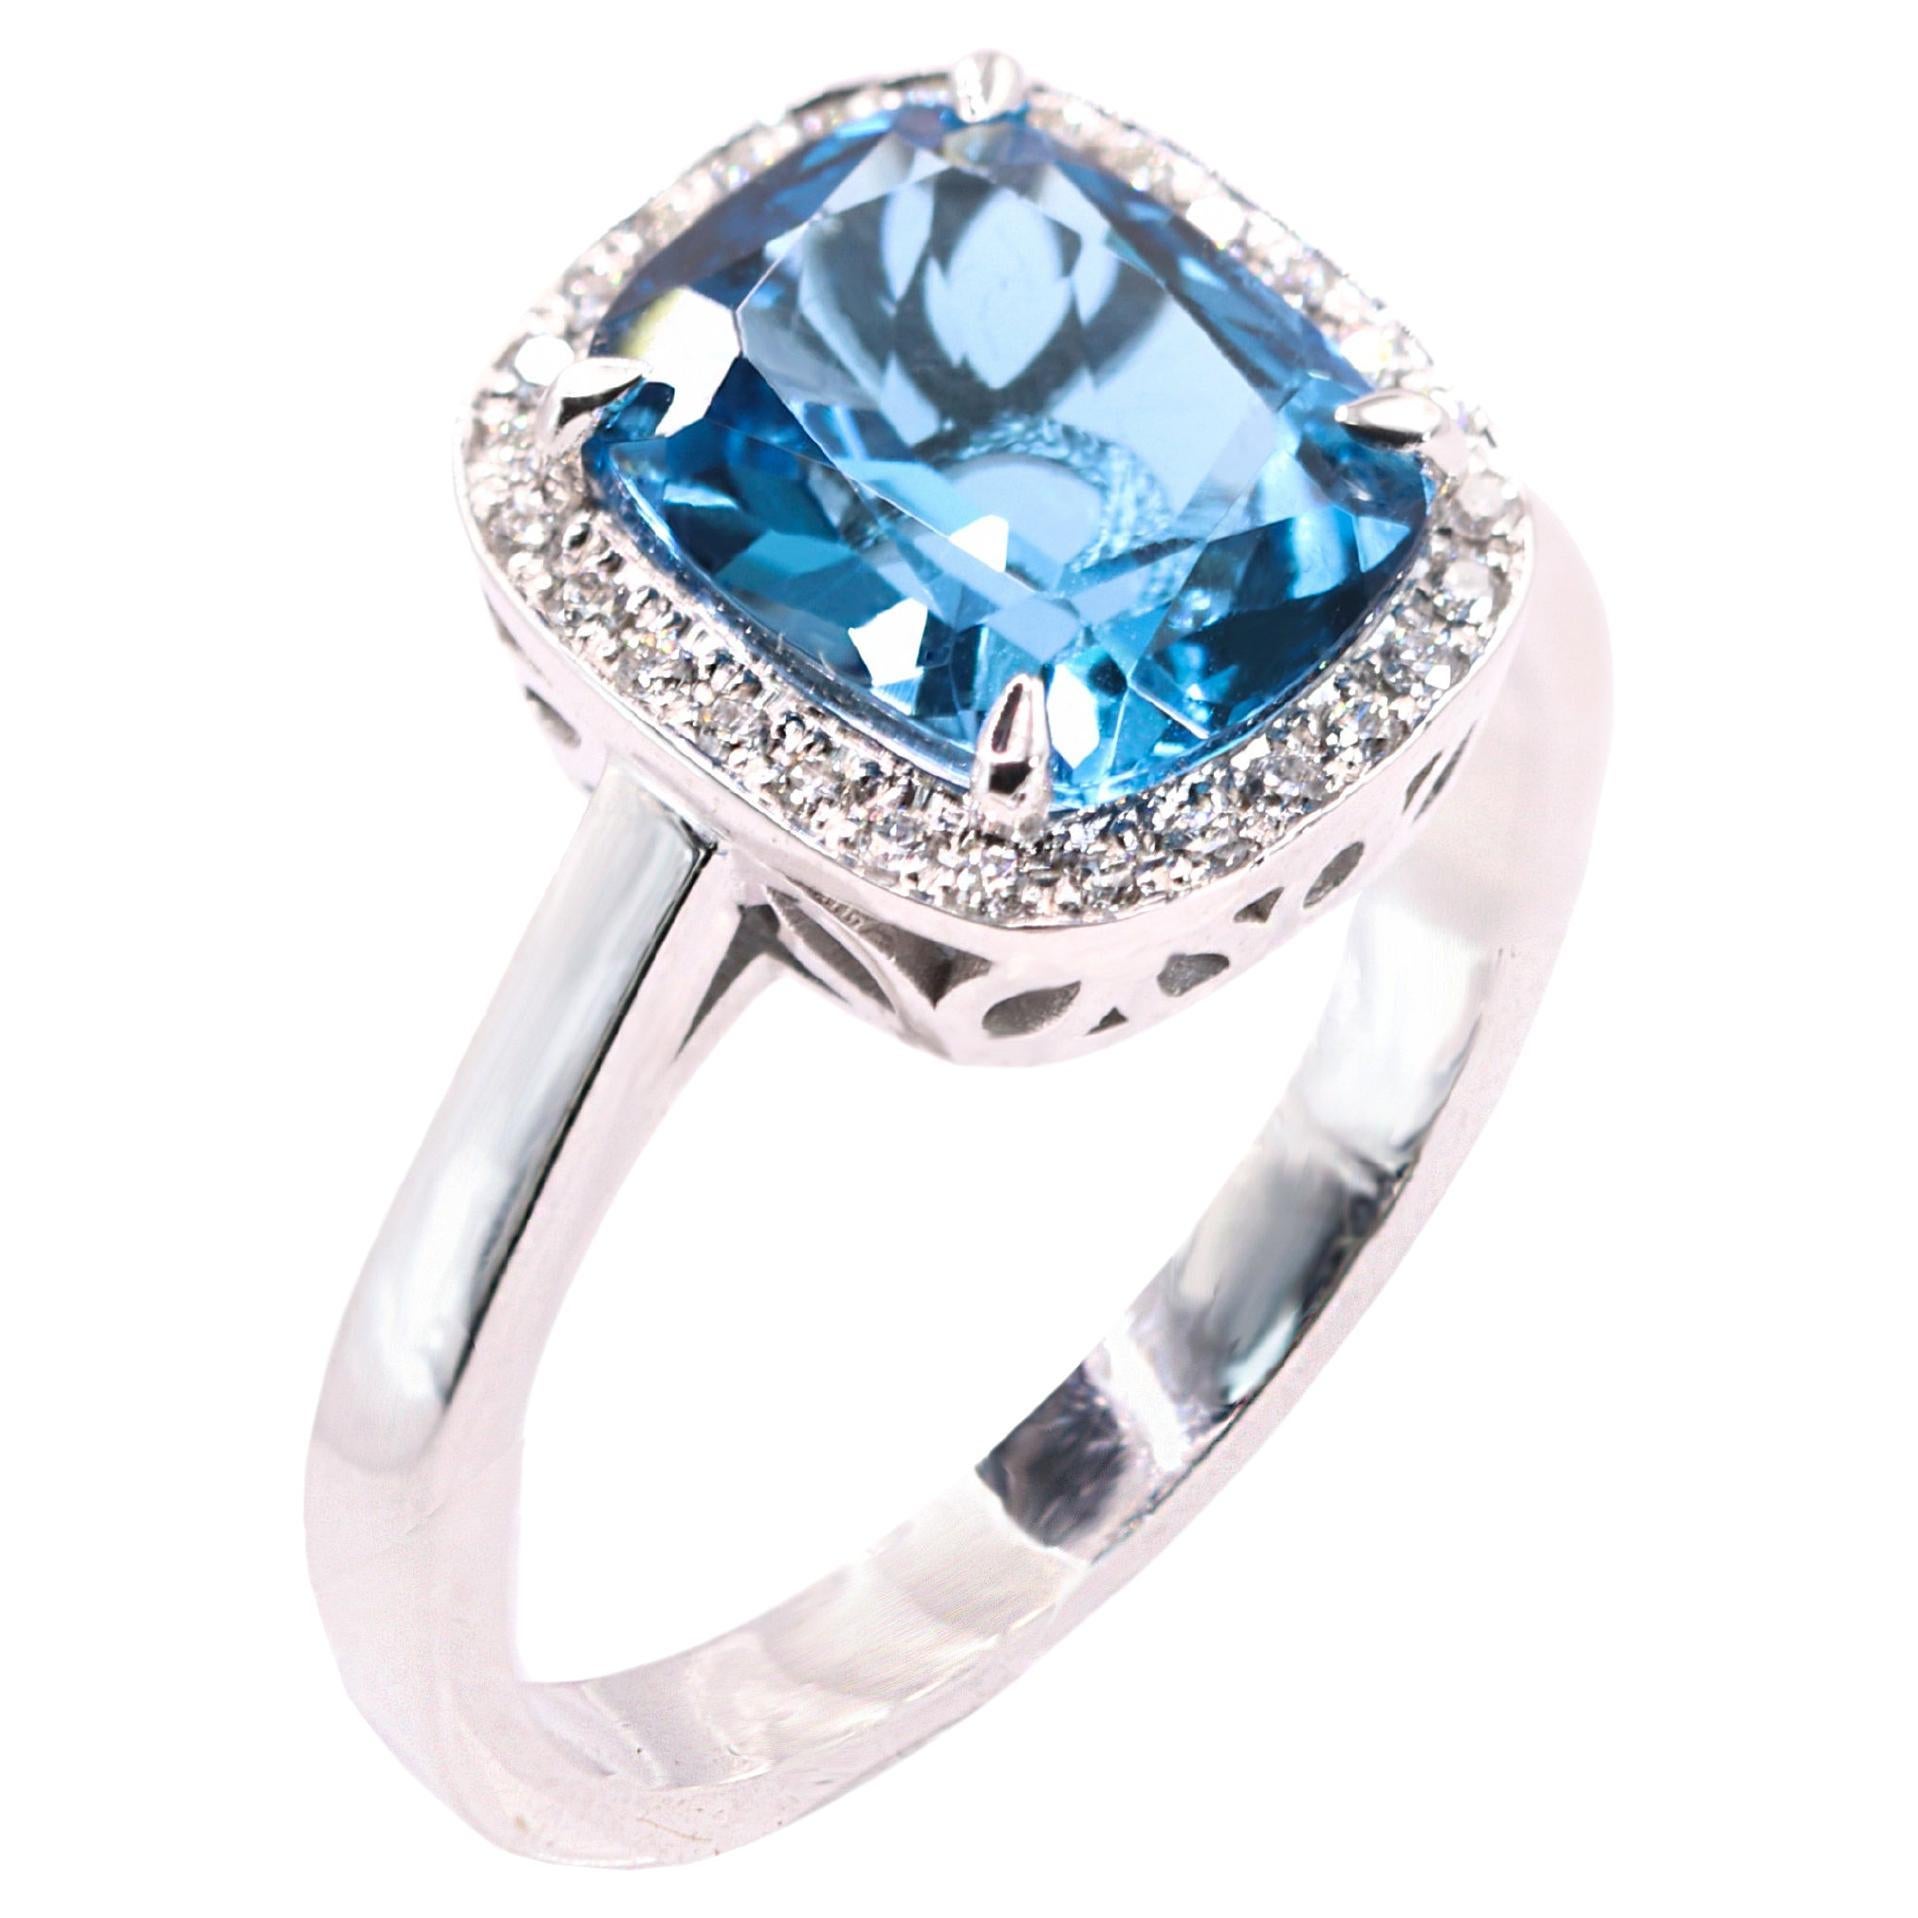 S.Georgios designer presents an oval shape 3.53 Carats Blue Topaz ring with a White Diamond Bezel with a total weight of 0.15 Carat weight. This simple yet stunning ring is handmade from 18 Karat White Gold in Athens Greece. The ring features a